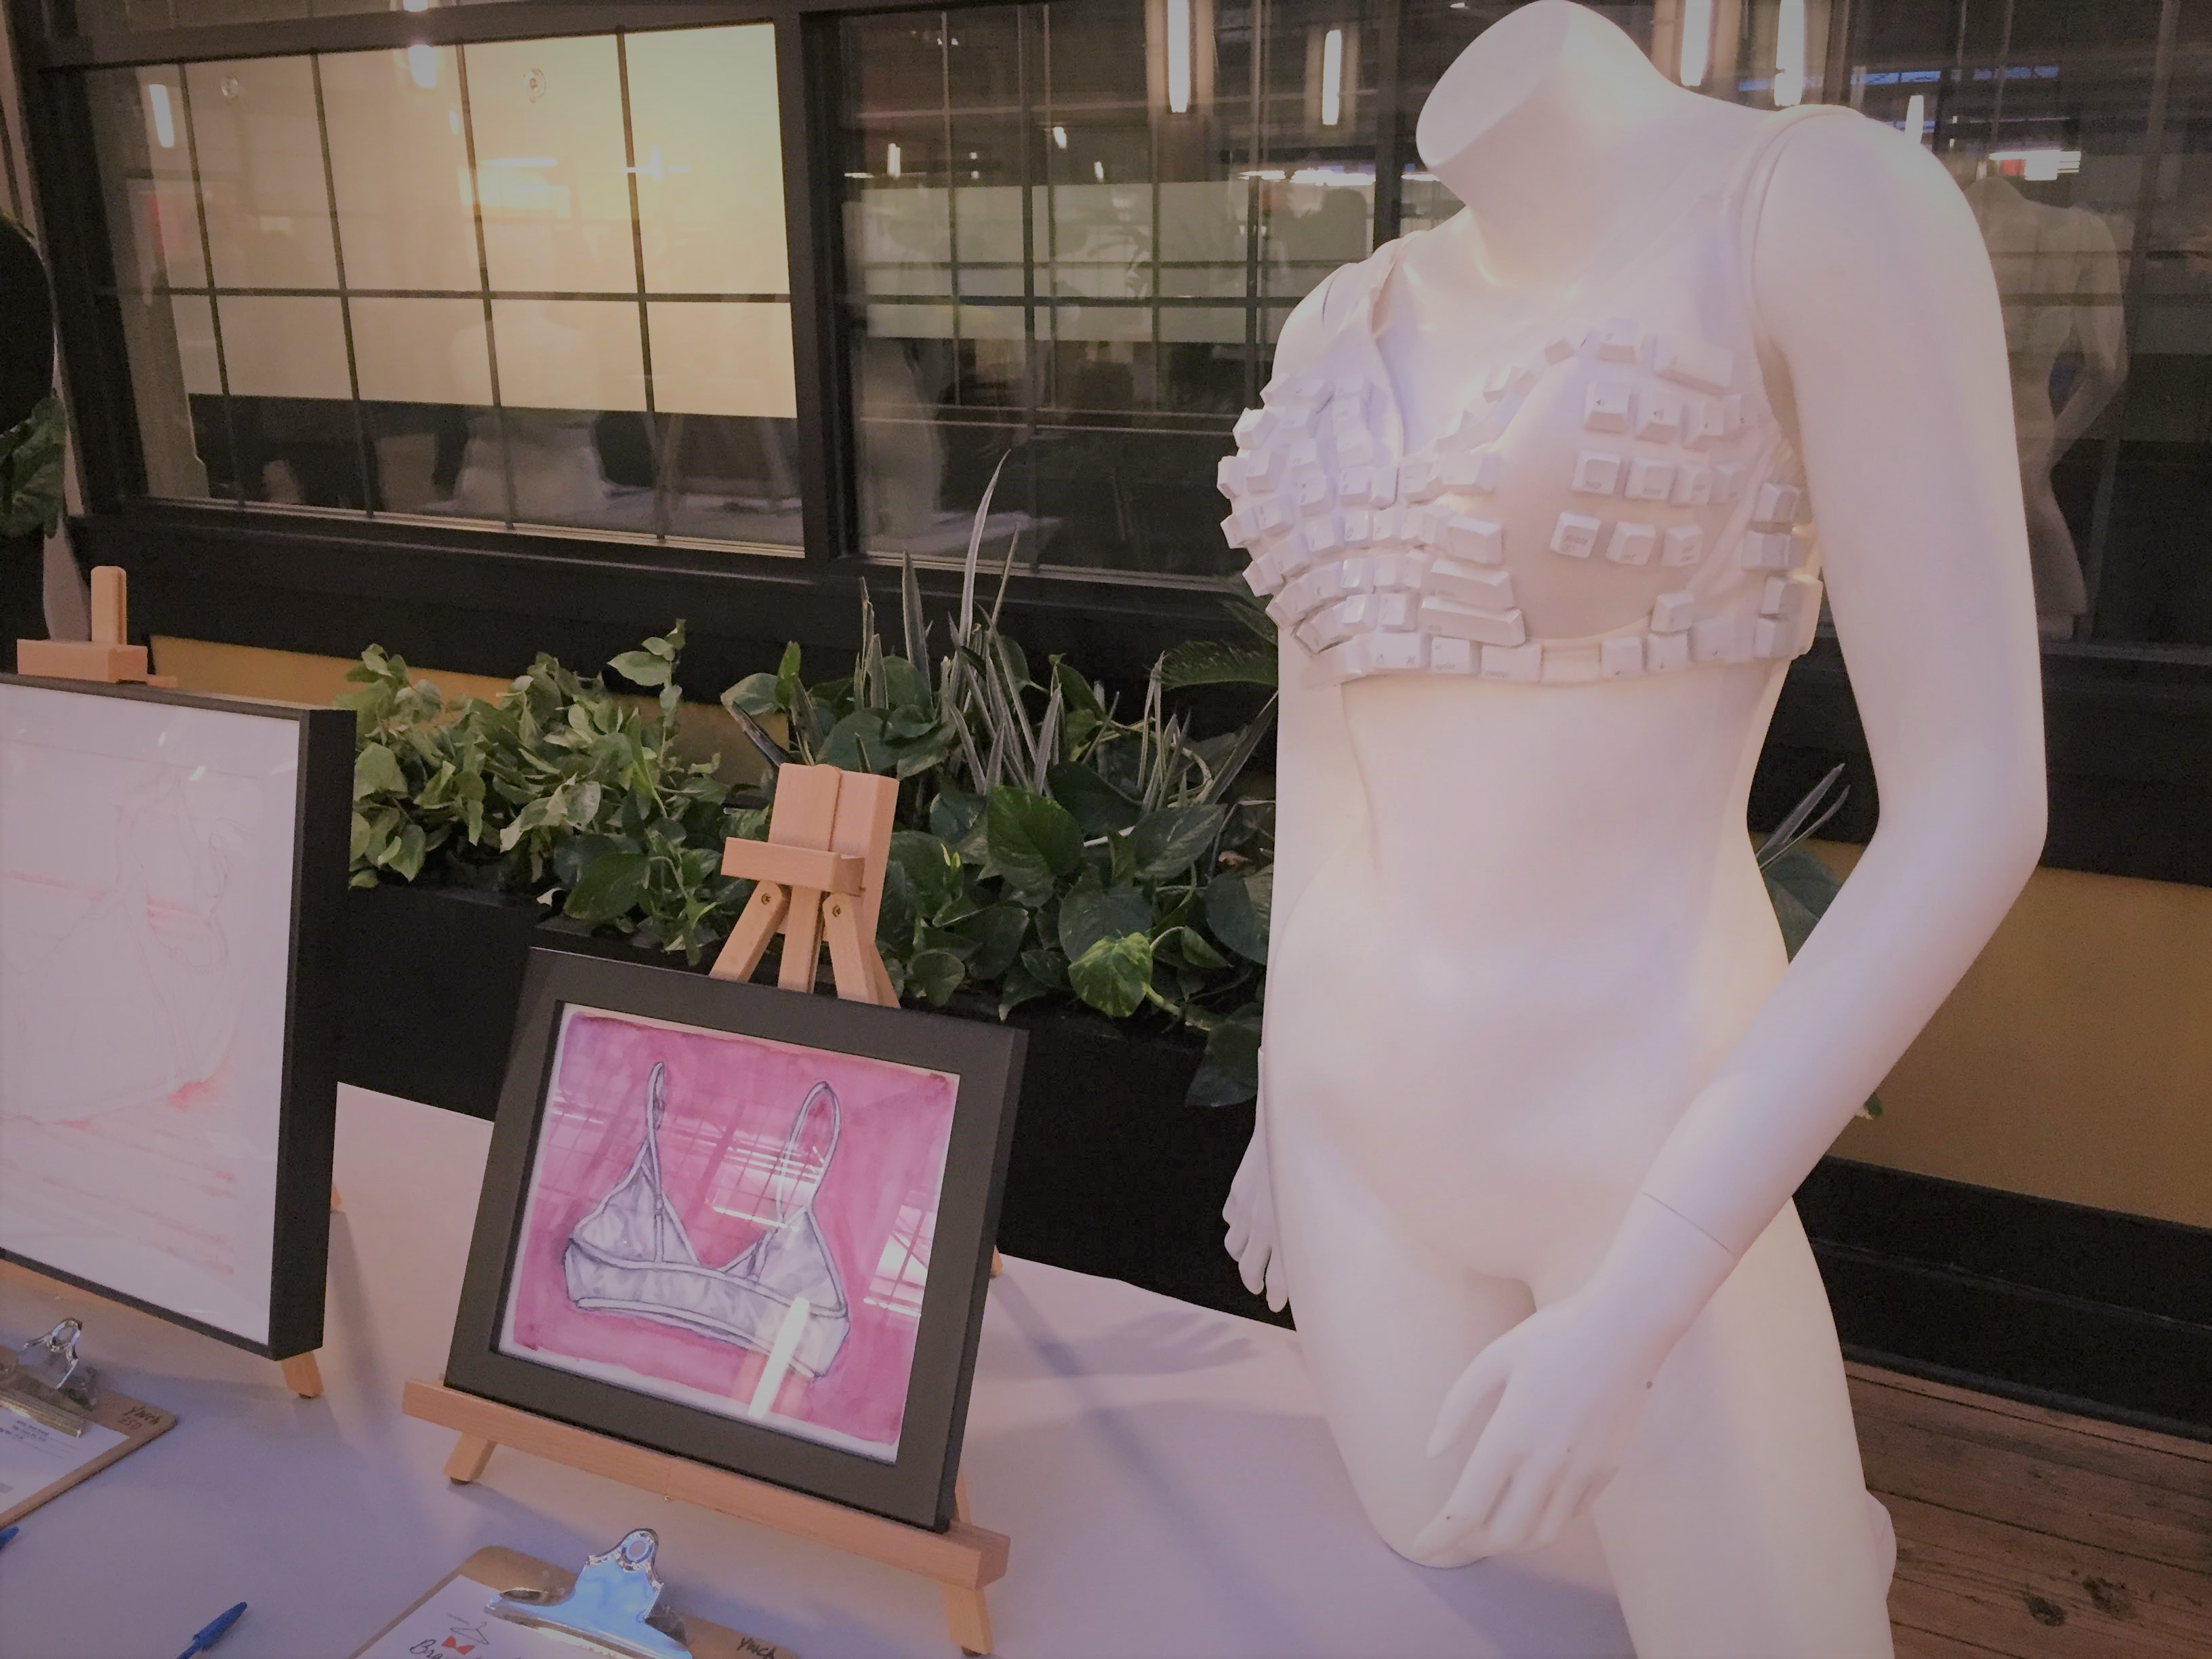 Kennesaw bra boutique ordered to remove 'offensive' window display